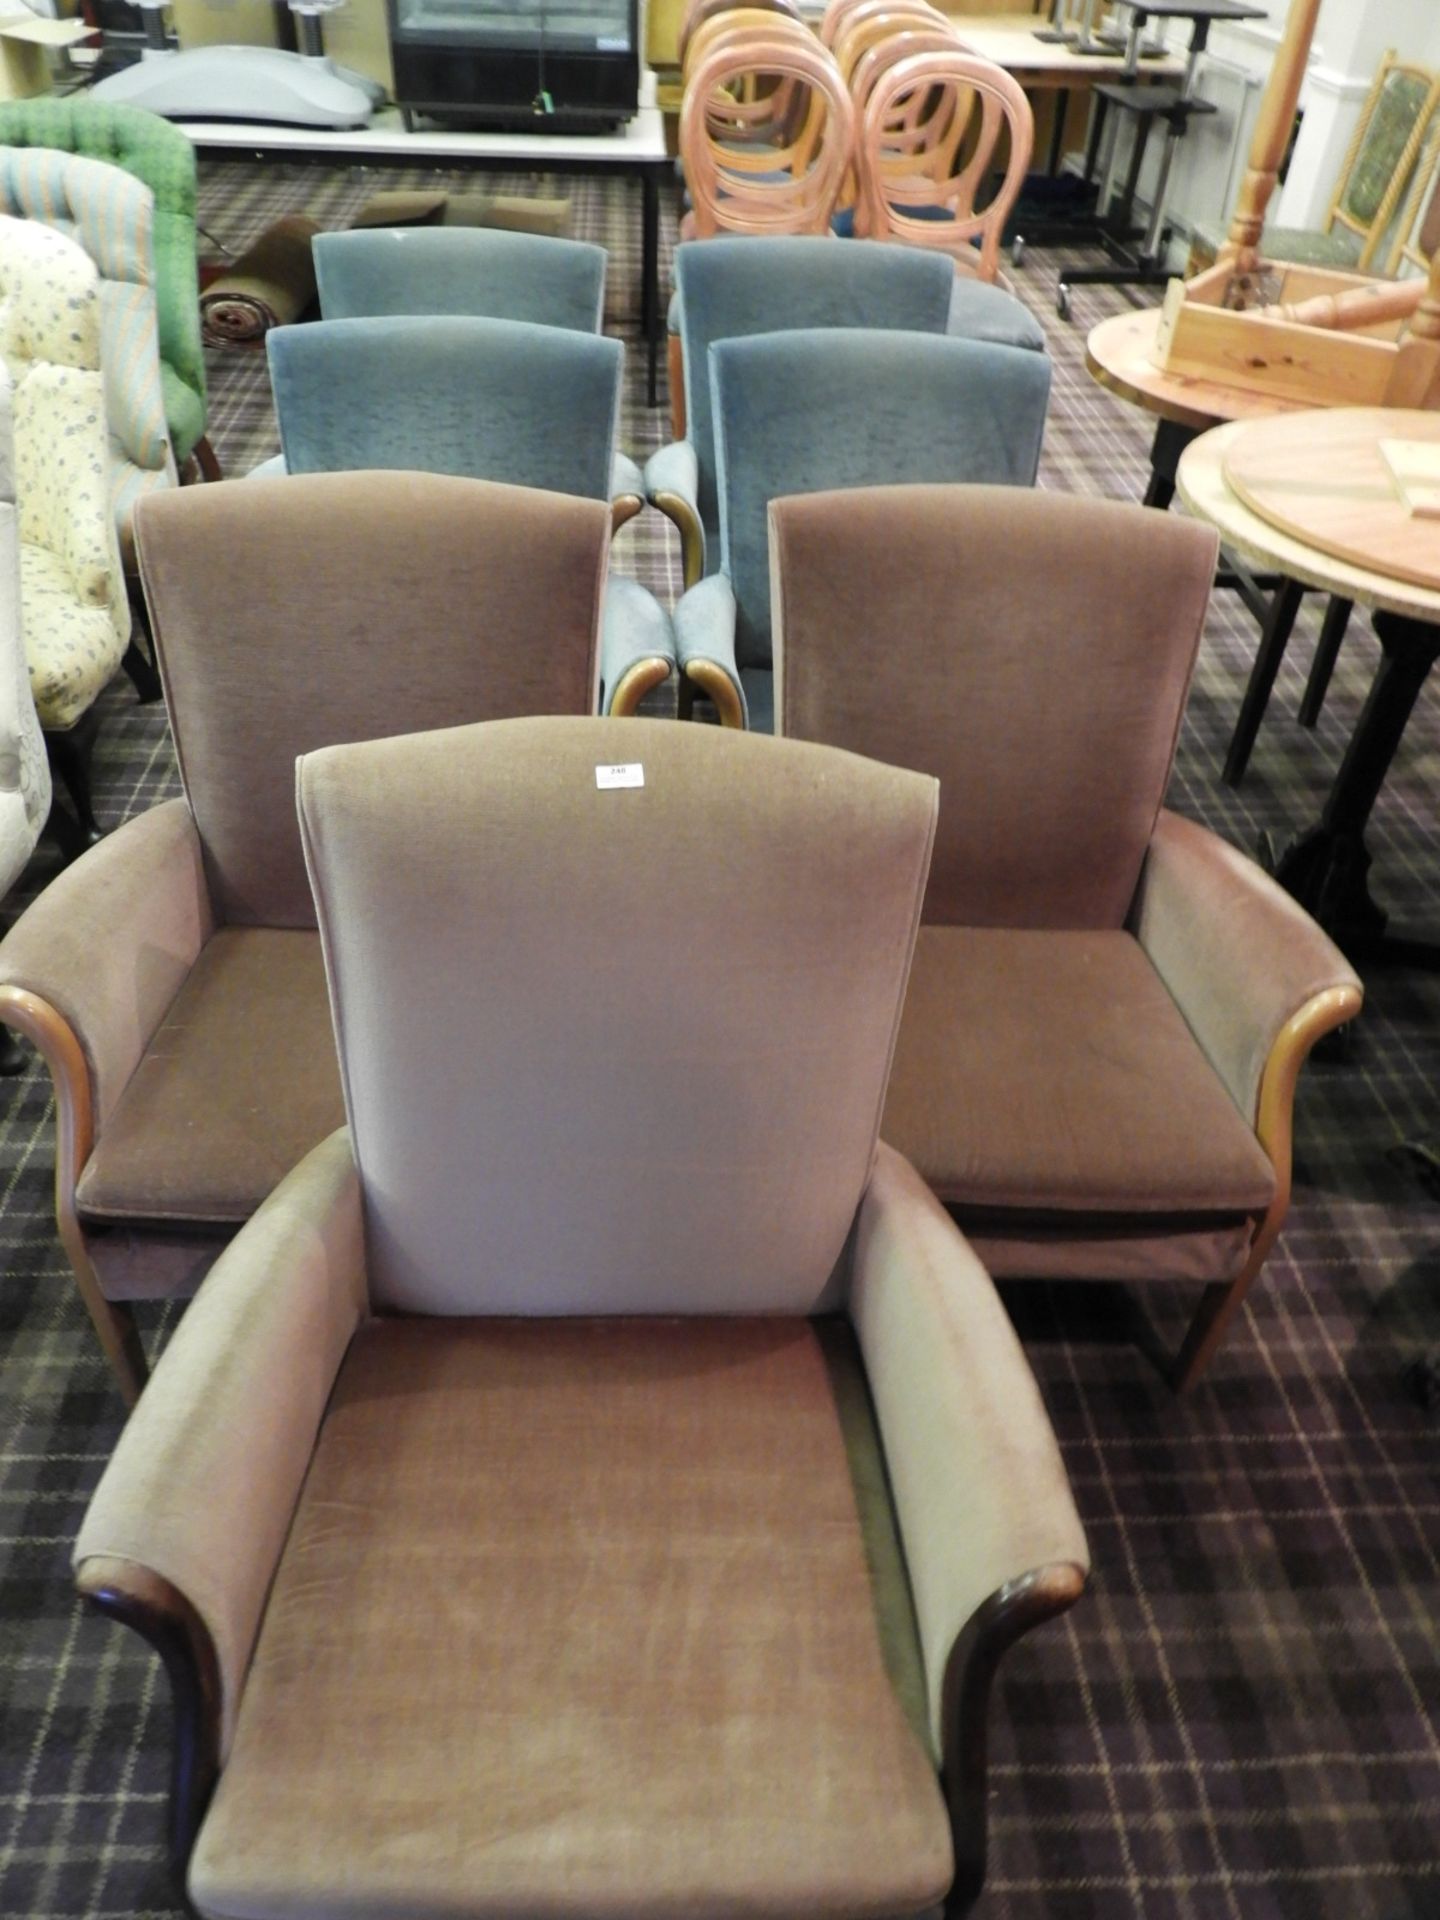 *Seven Upholstered Reception Chairs